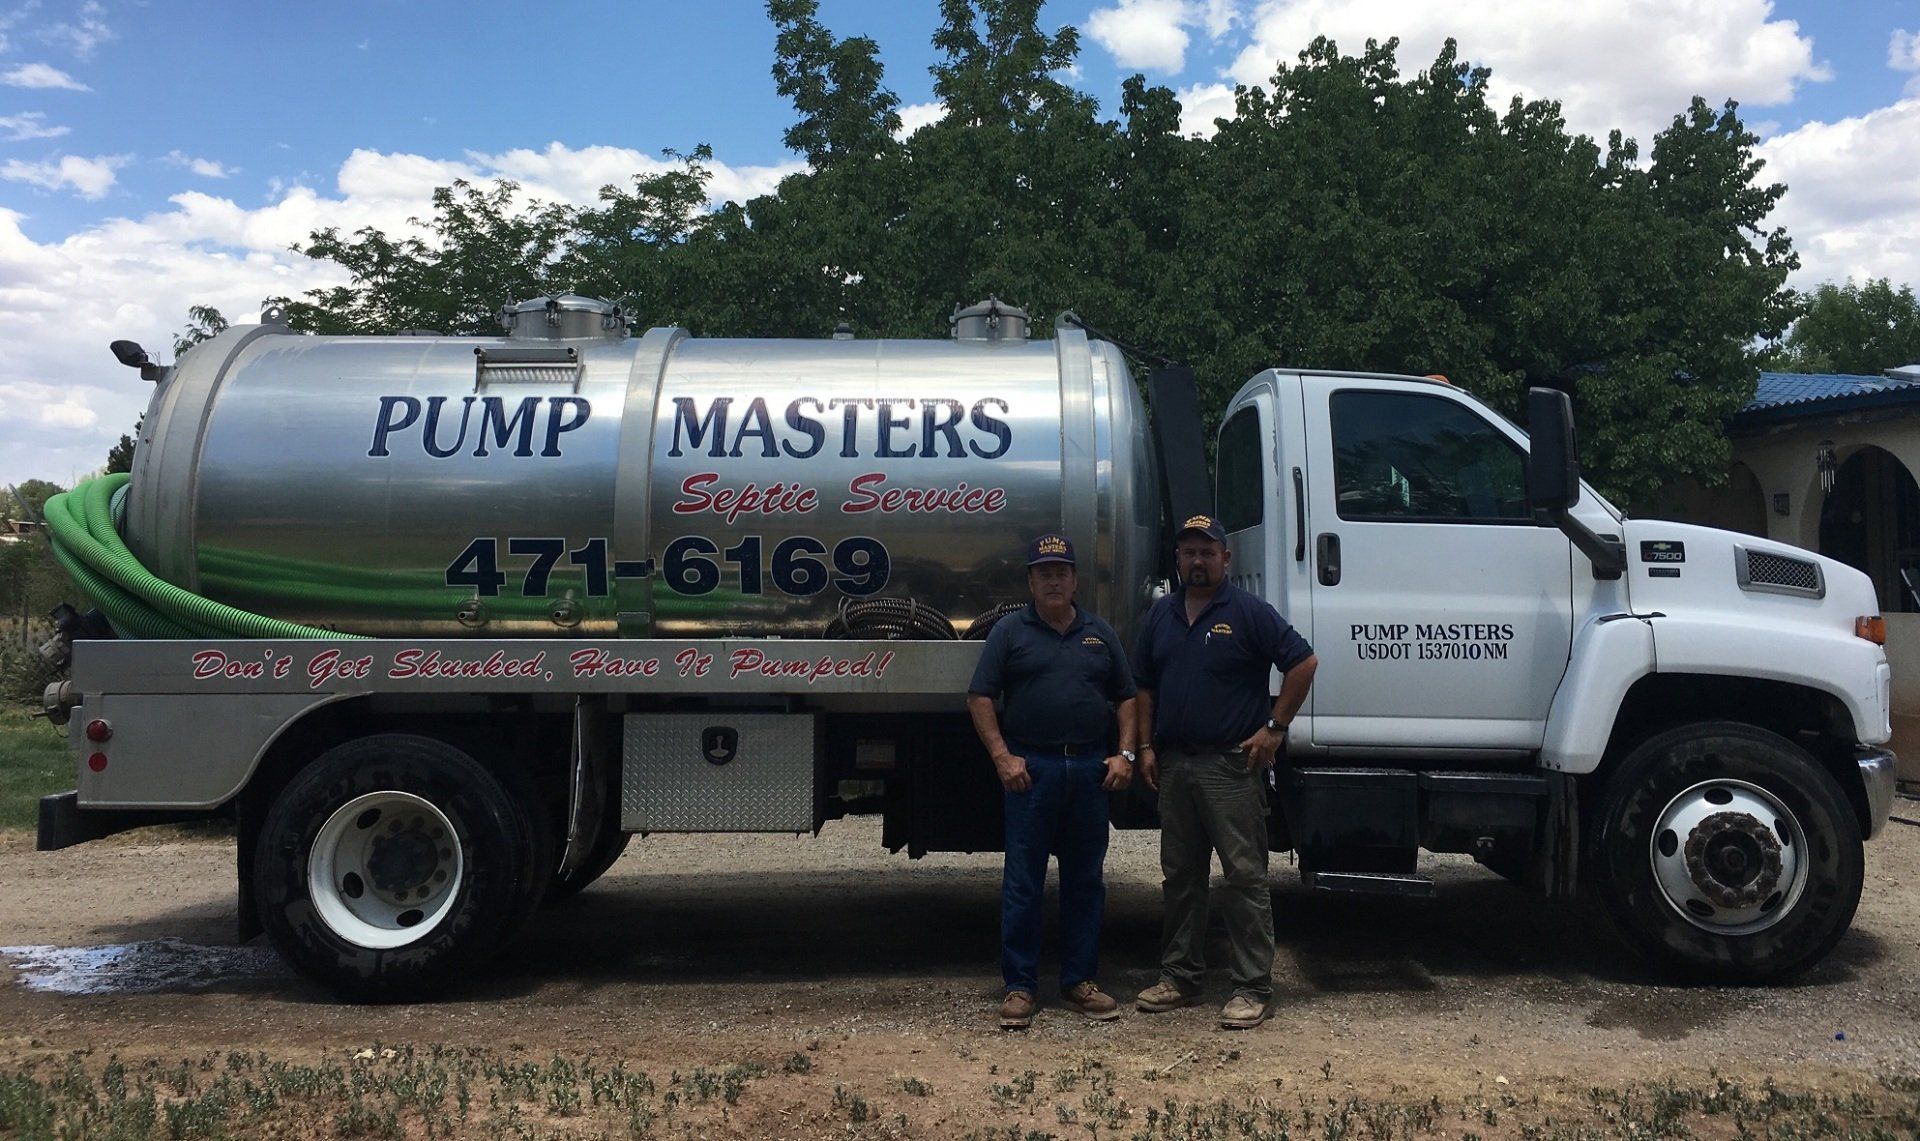 truck of Pump Master Septic Services - About Us in Santa Fe, NM